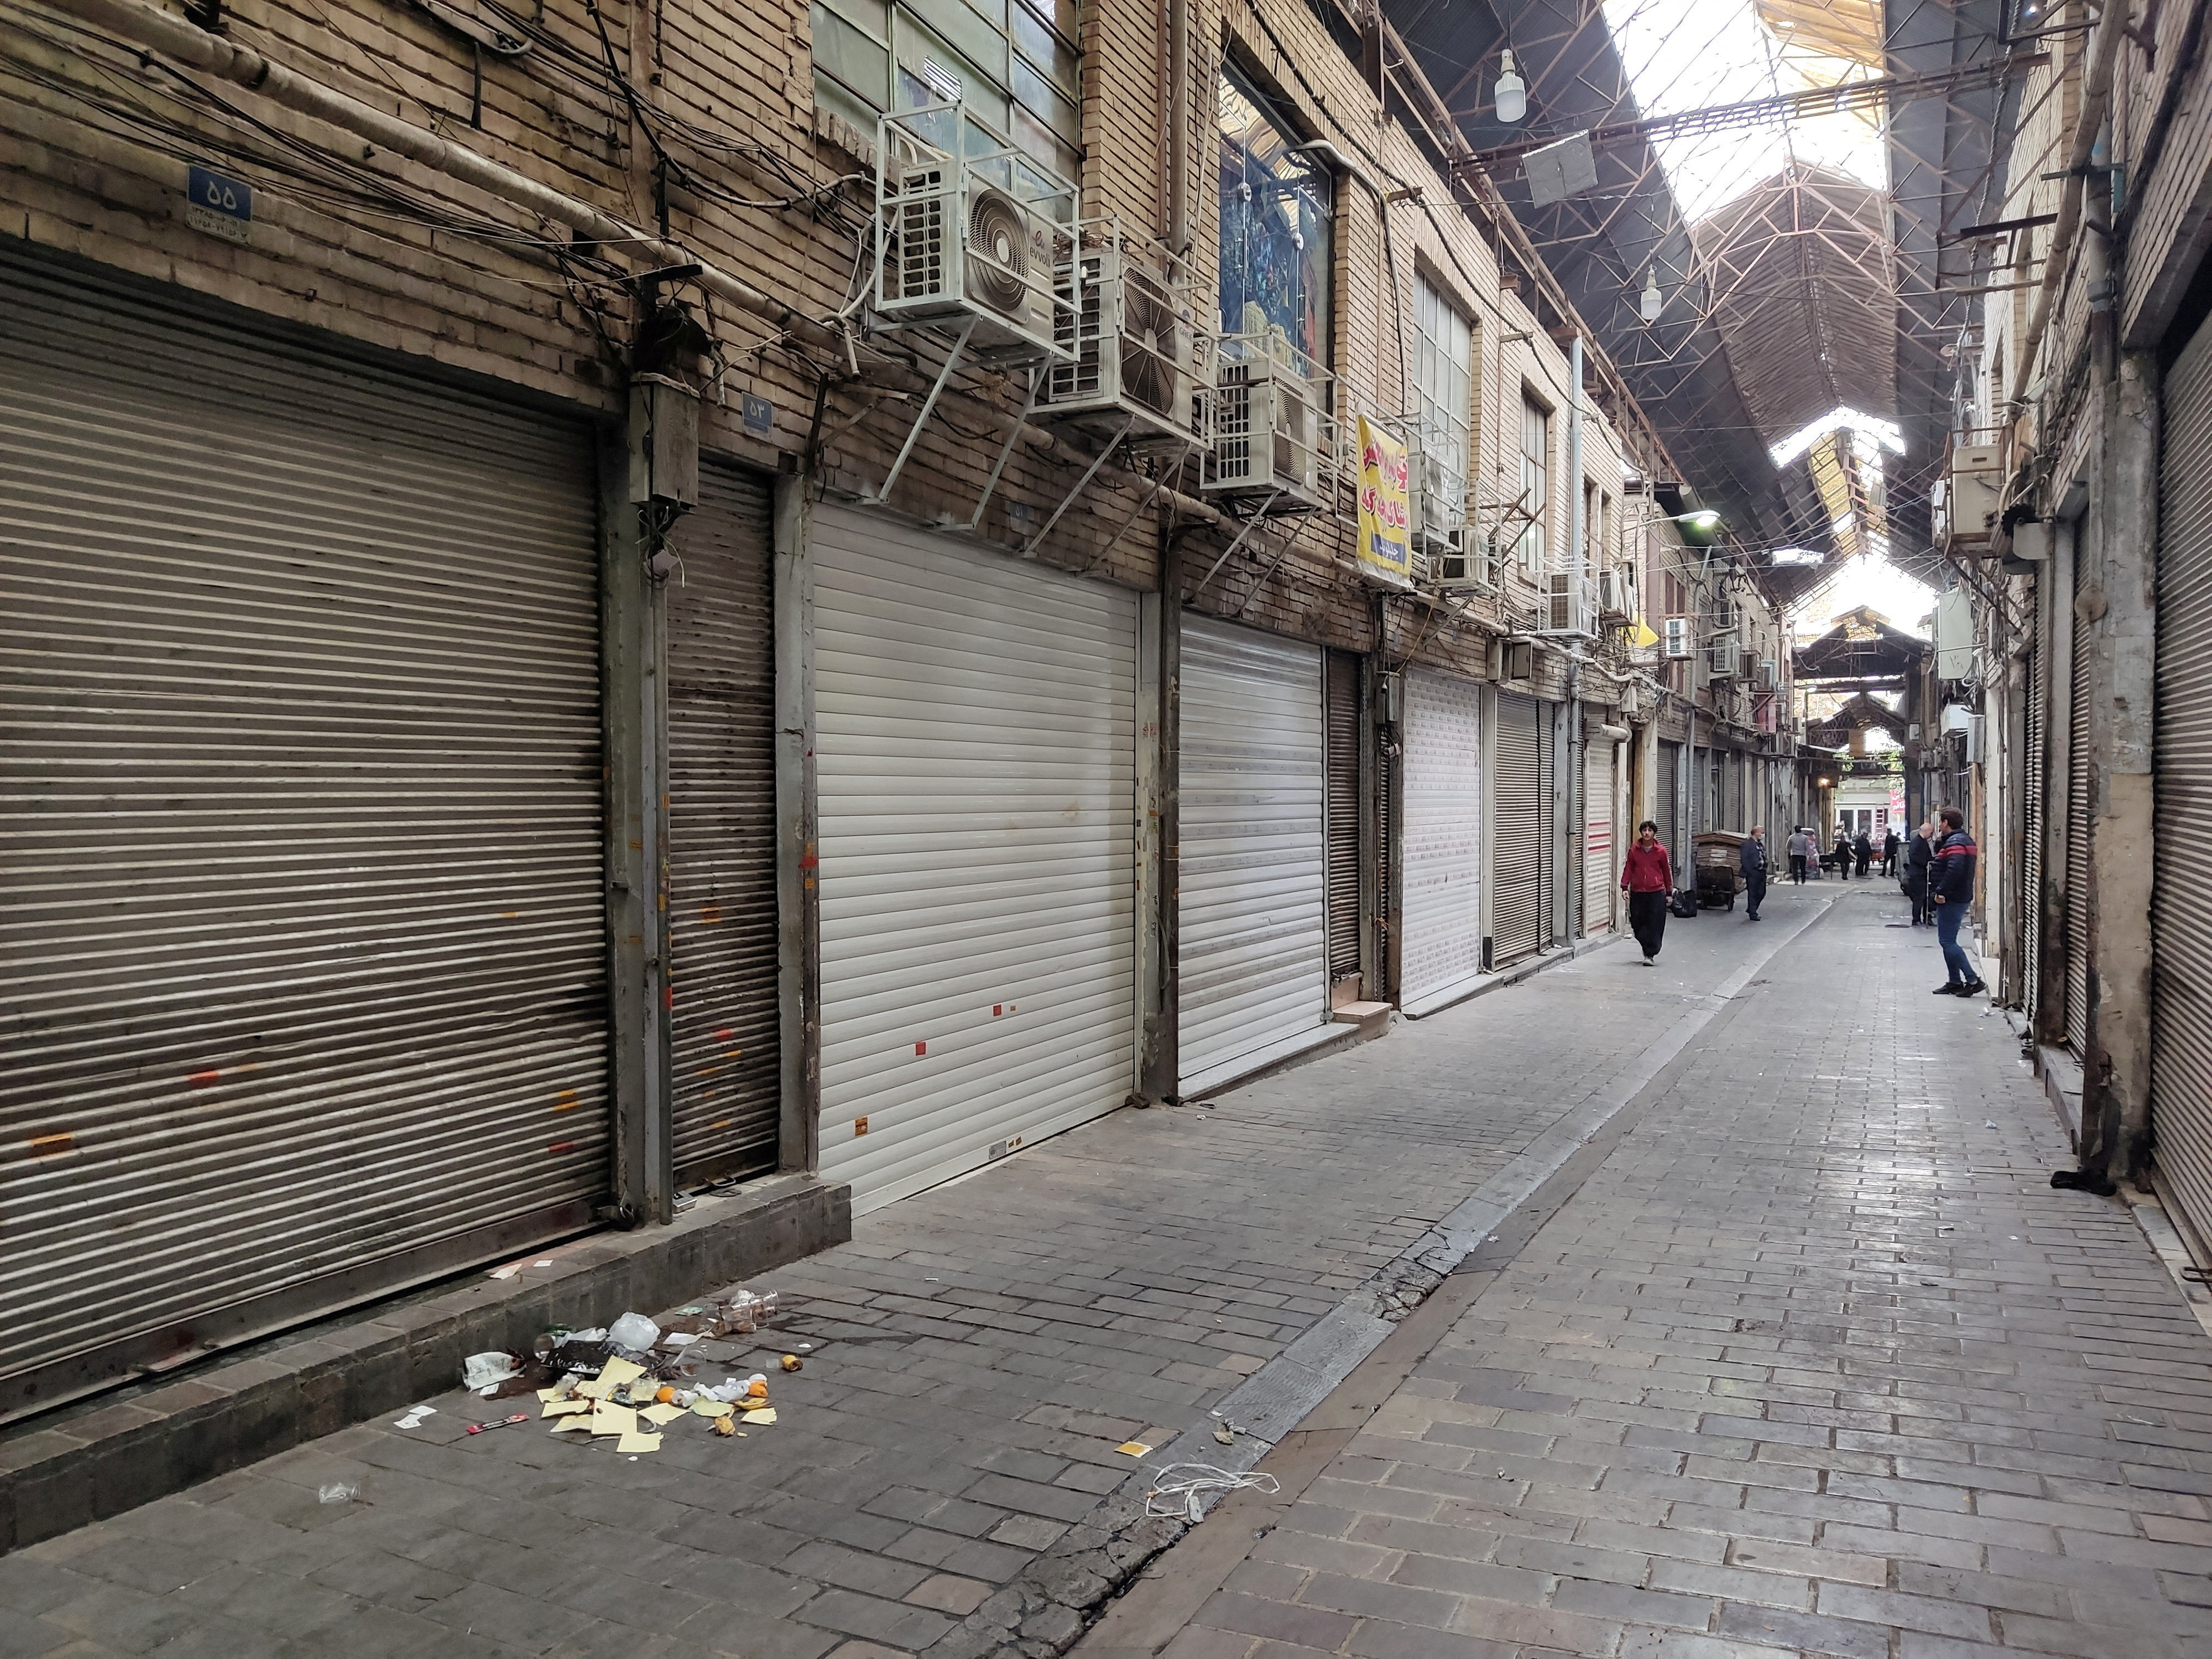 Shops are closed following the recent riots and the call of protesters to close the markets, in Tehran